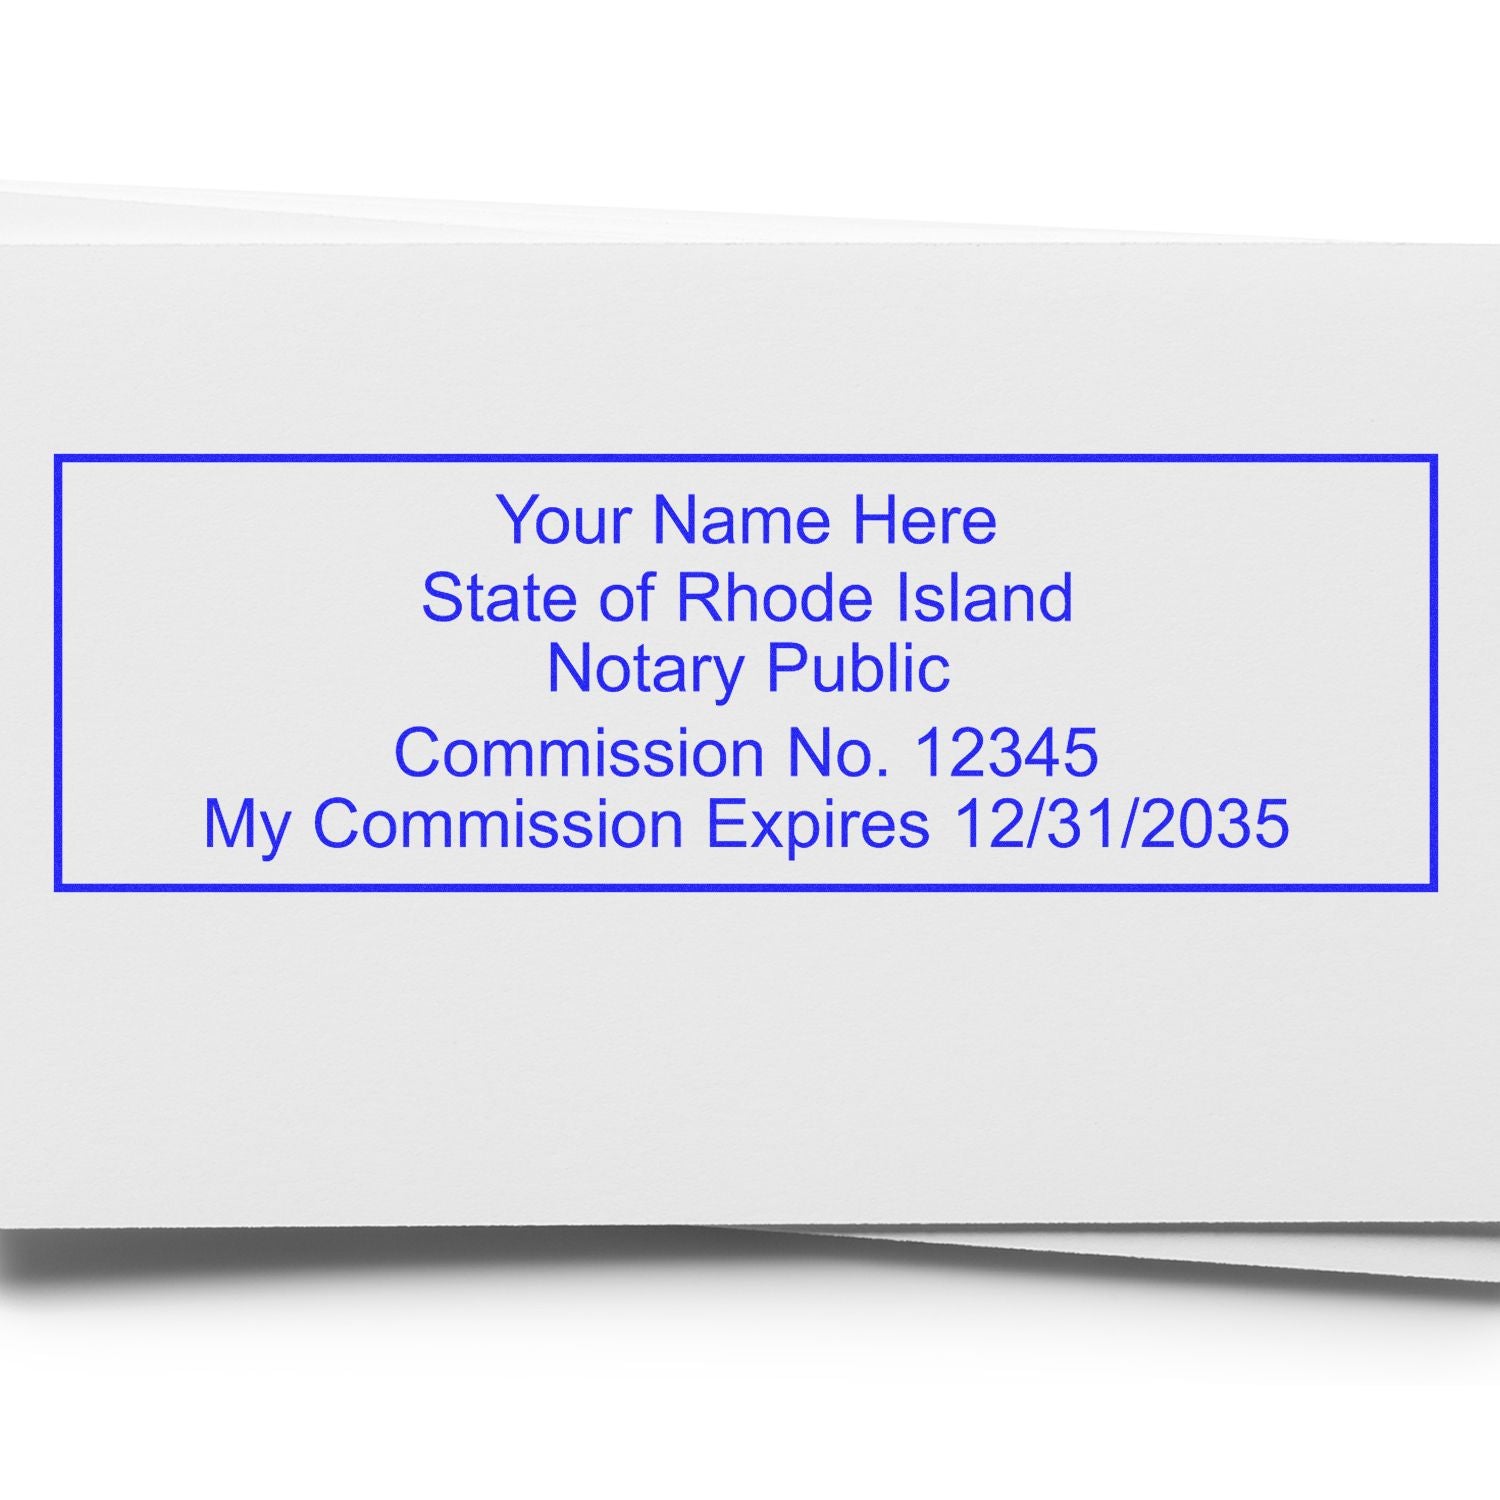 This paper is stamped with a sample imprint of the Slim Pre-Inked Rectangular Notary Stamp for Rhode Island, signifying its quality and reliability.